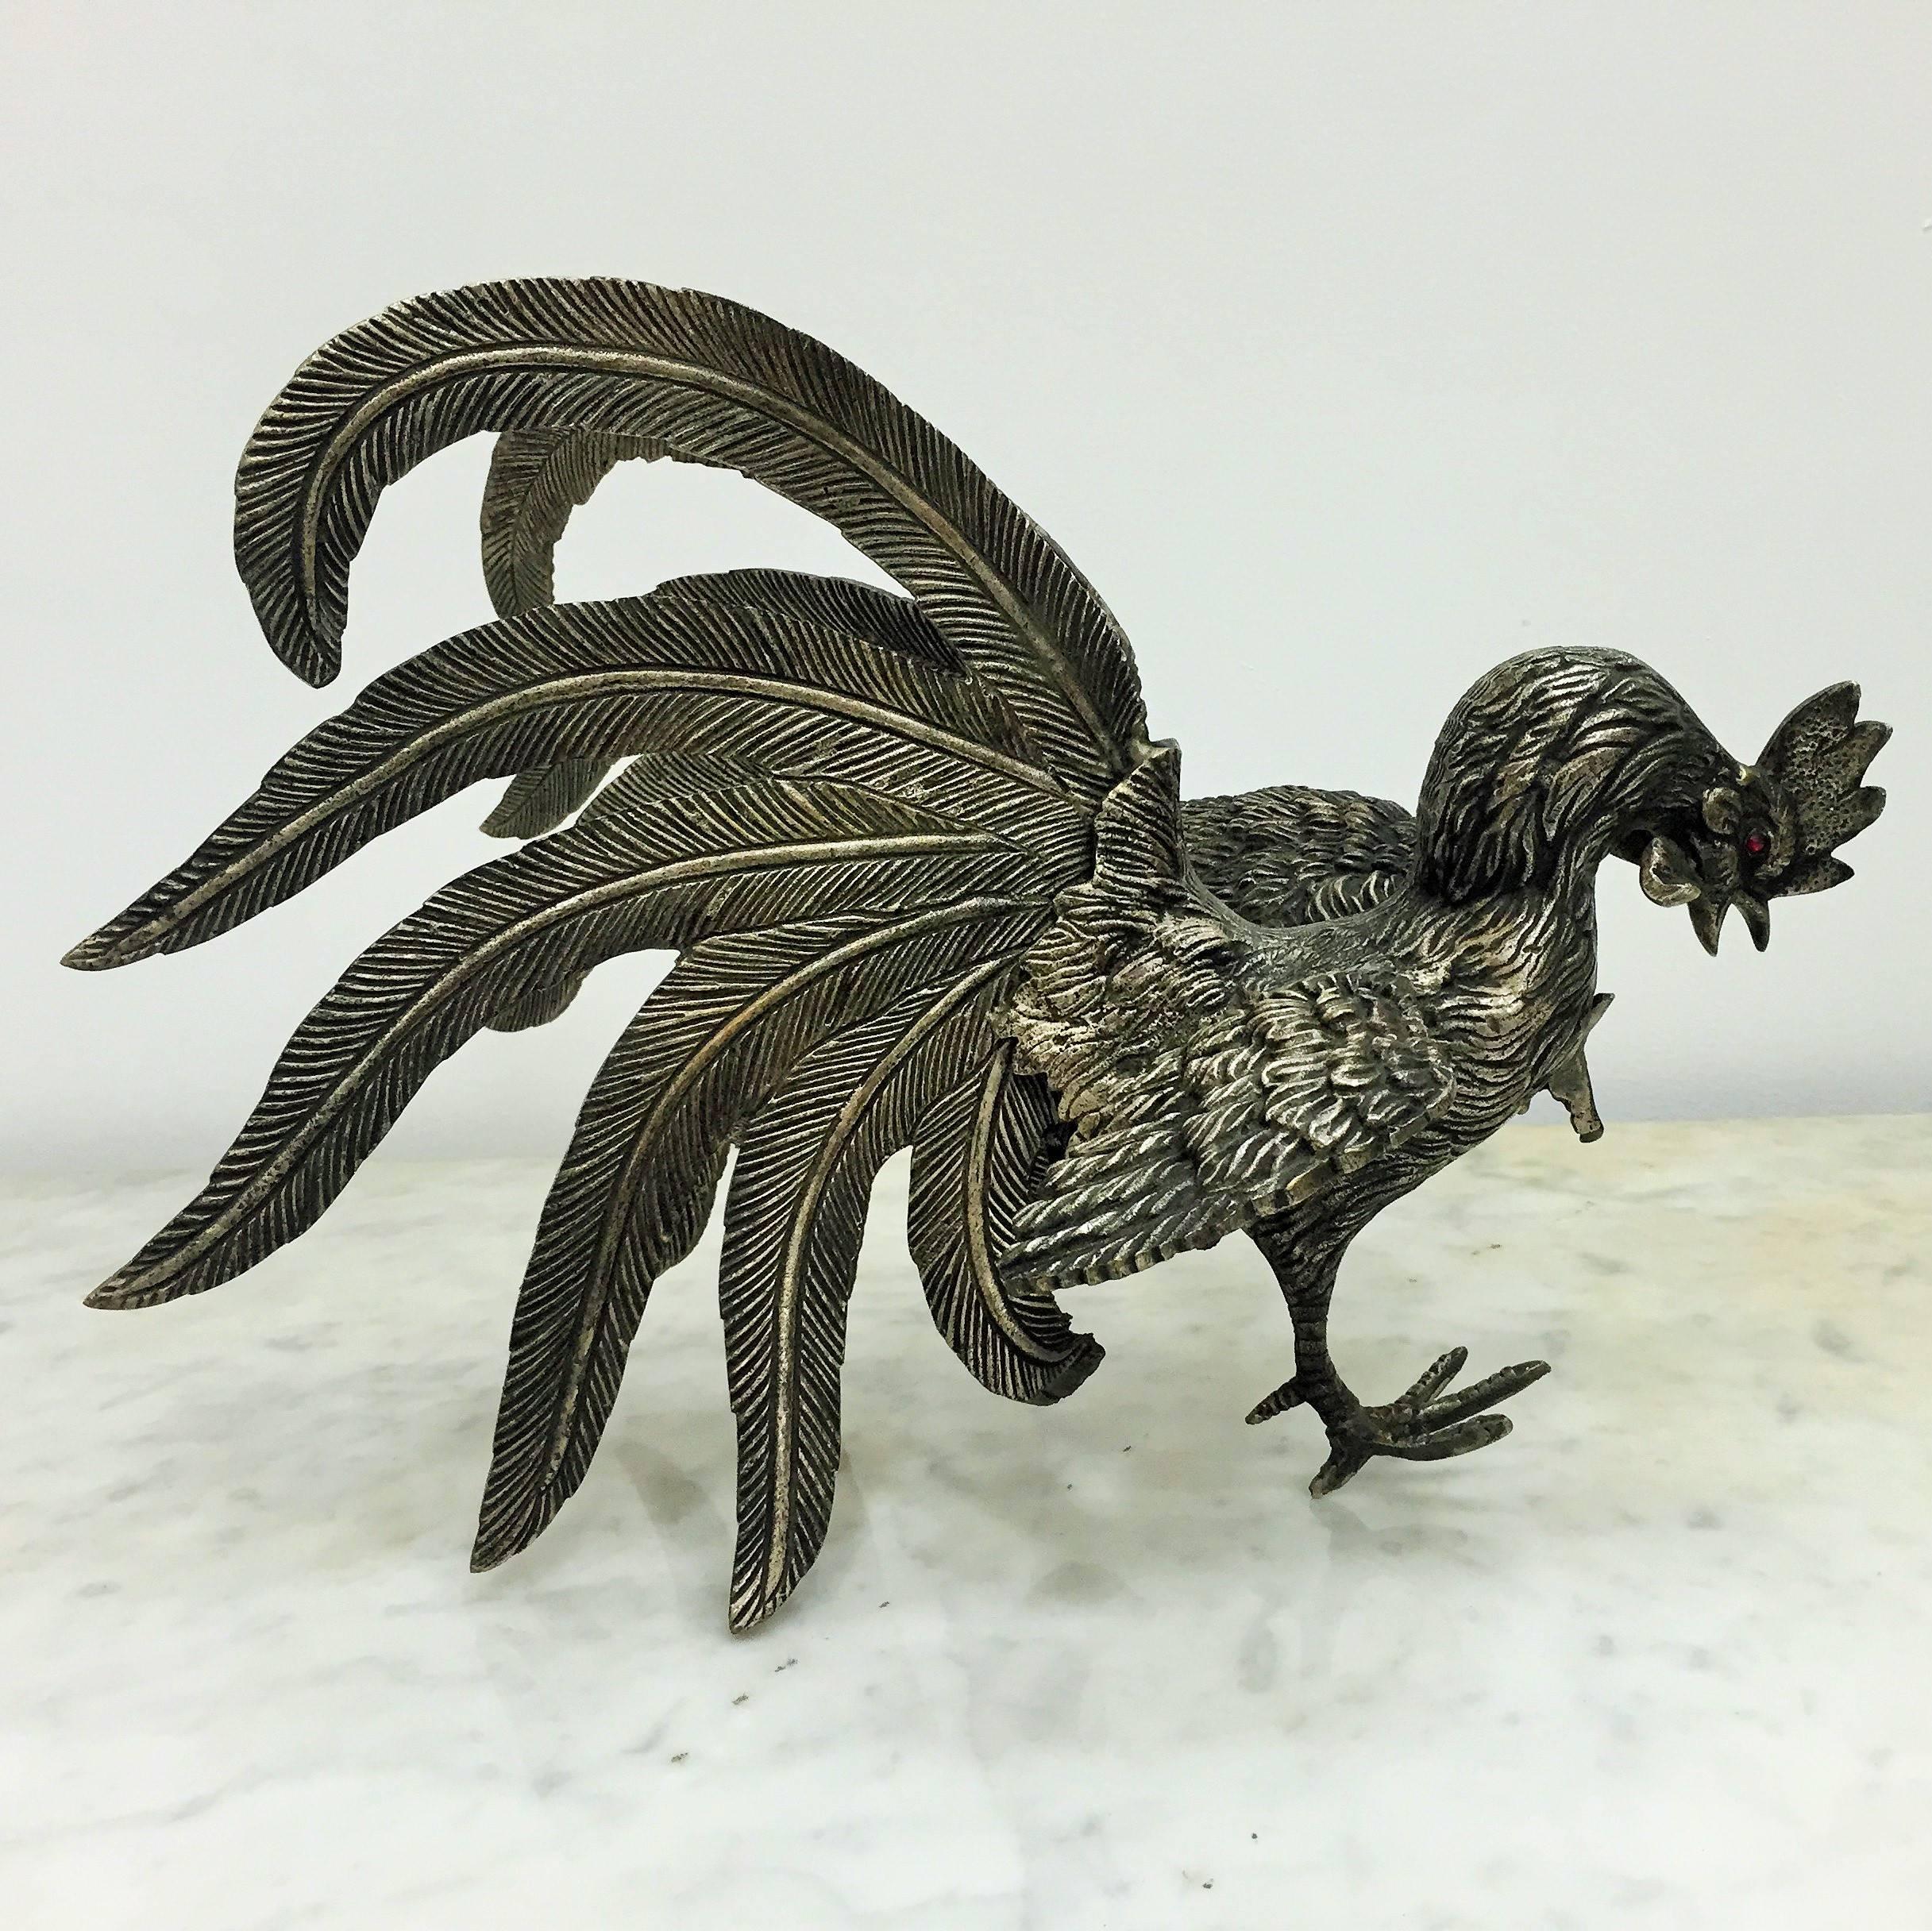 fighting rooster statue